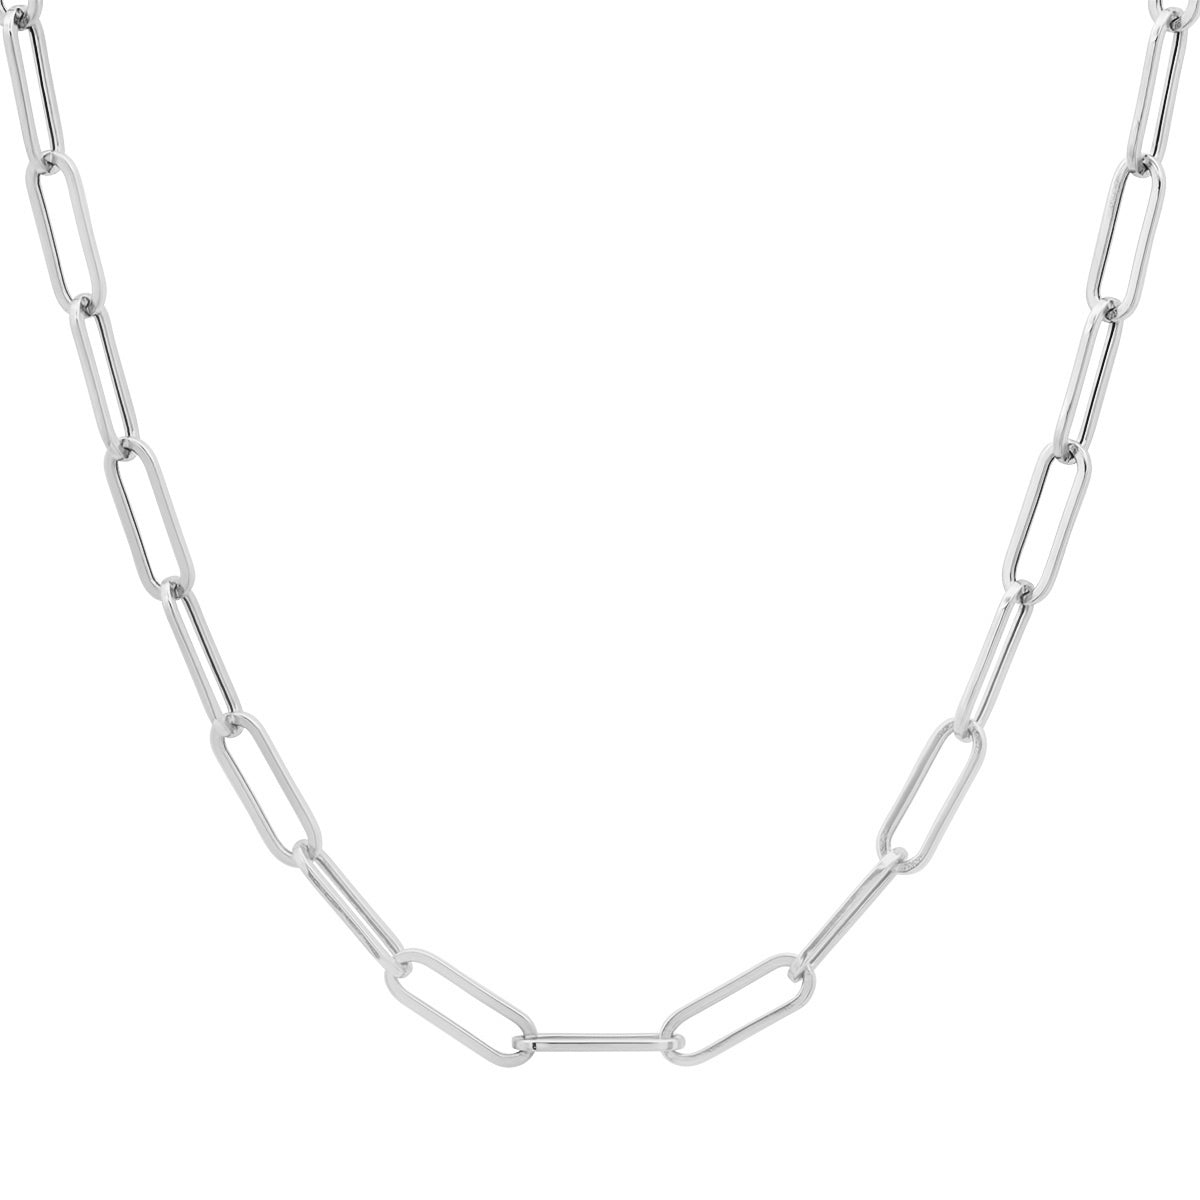 Buy Mini Paperclip Chain, White, Made with BIS Hallmarked Gold